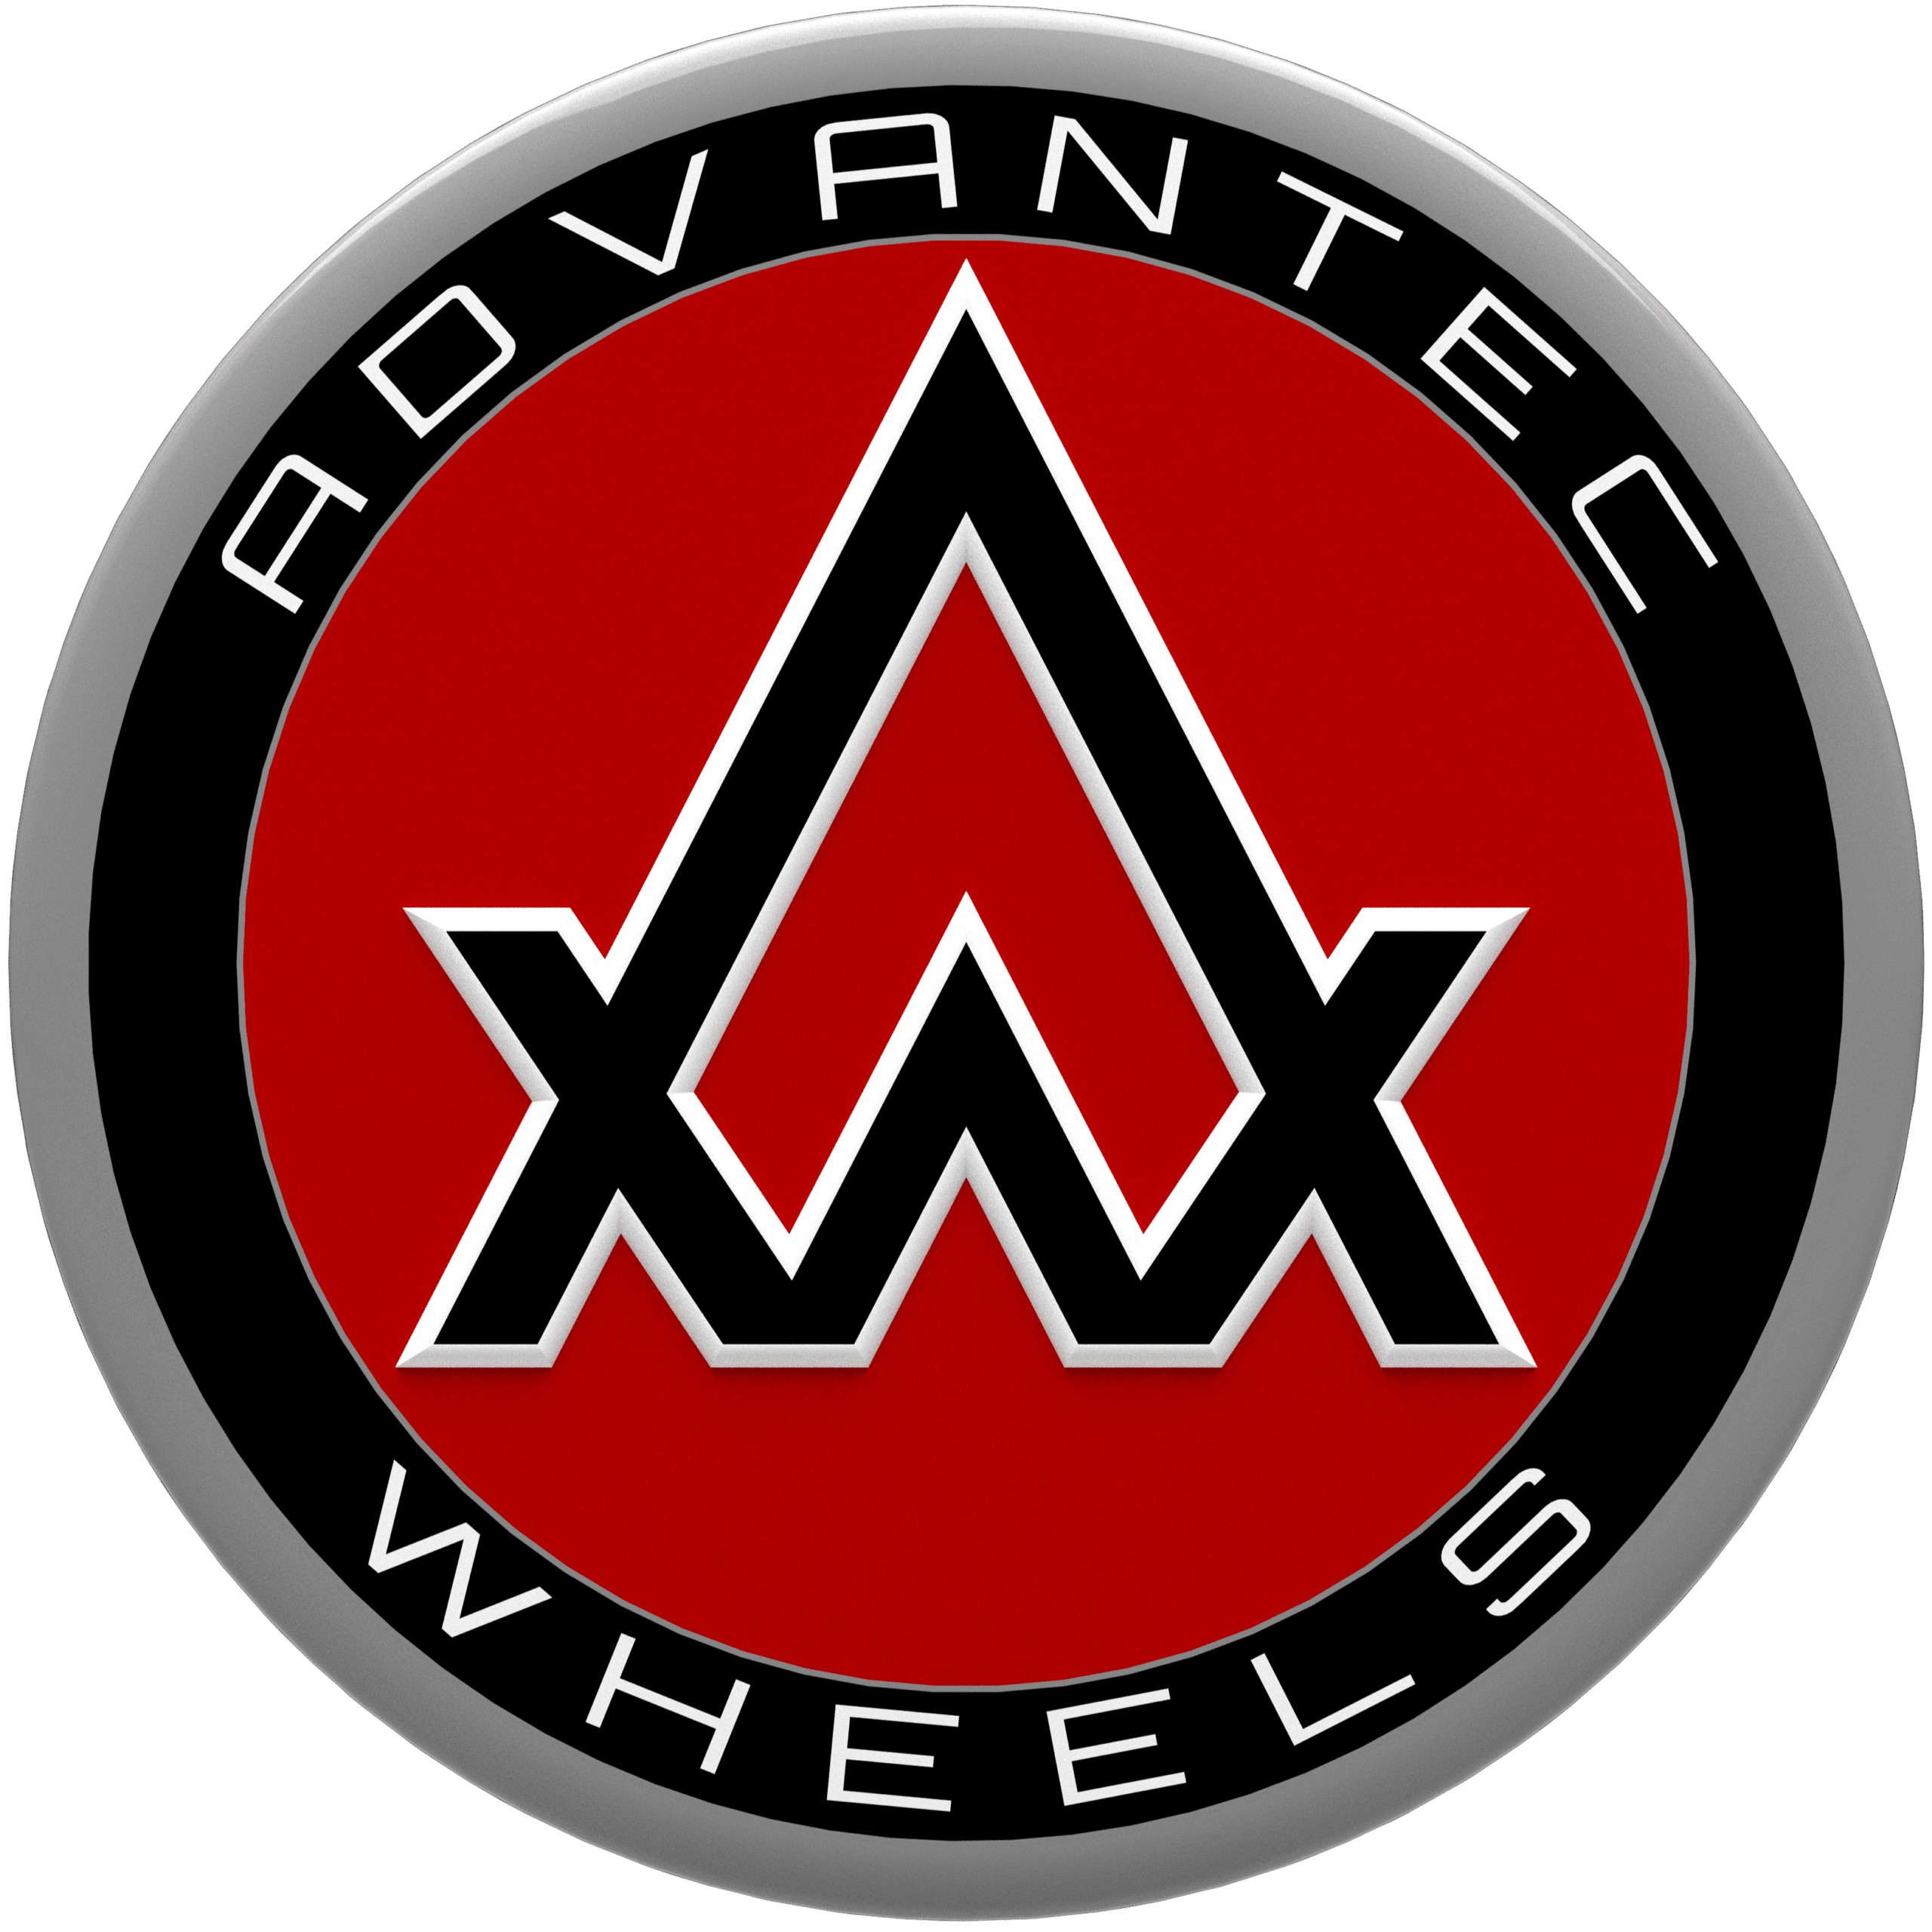 Advantec Wheels Partners with 8 PVRs Across India to Kick-start Pre-order Booking for its Premium Flow-forged Alloy Wheels